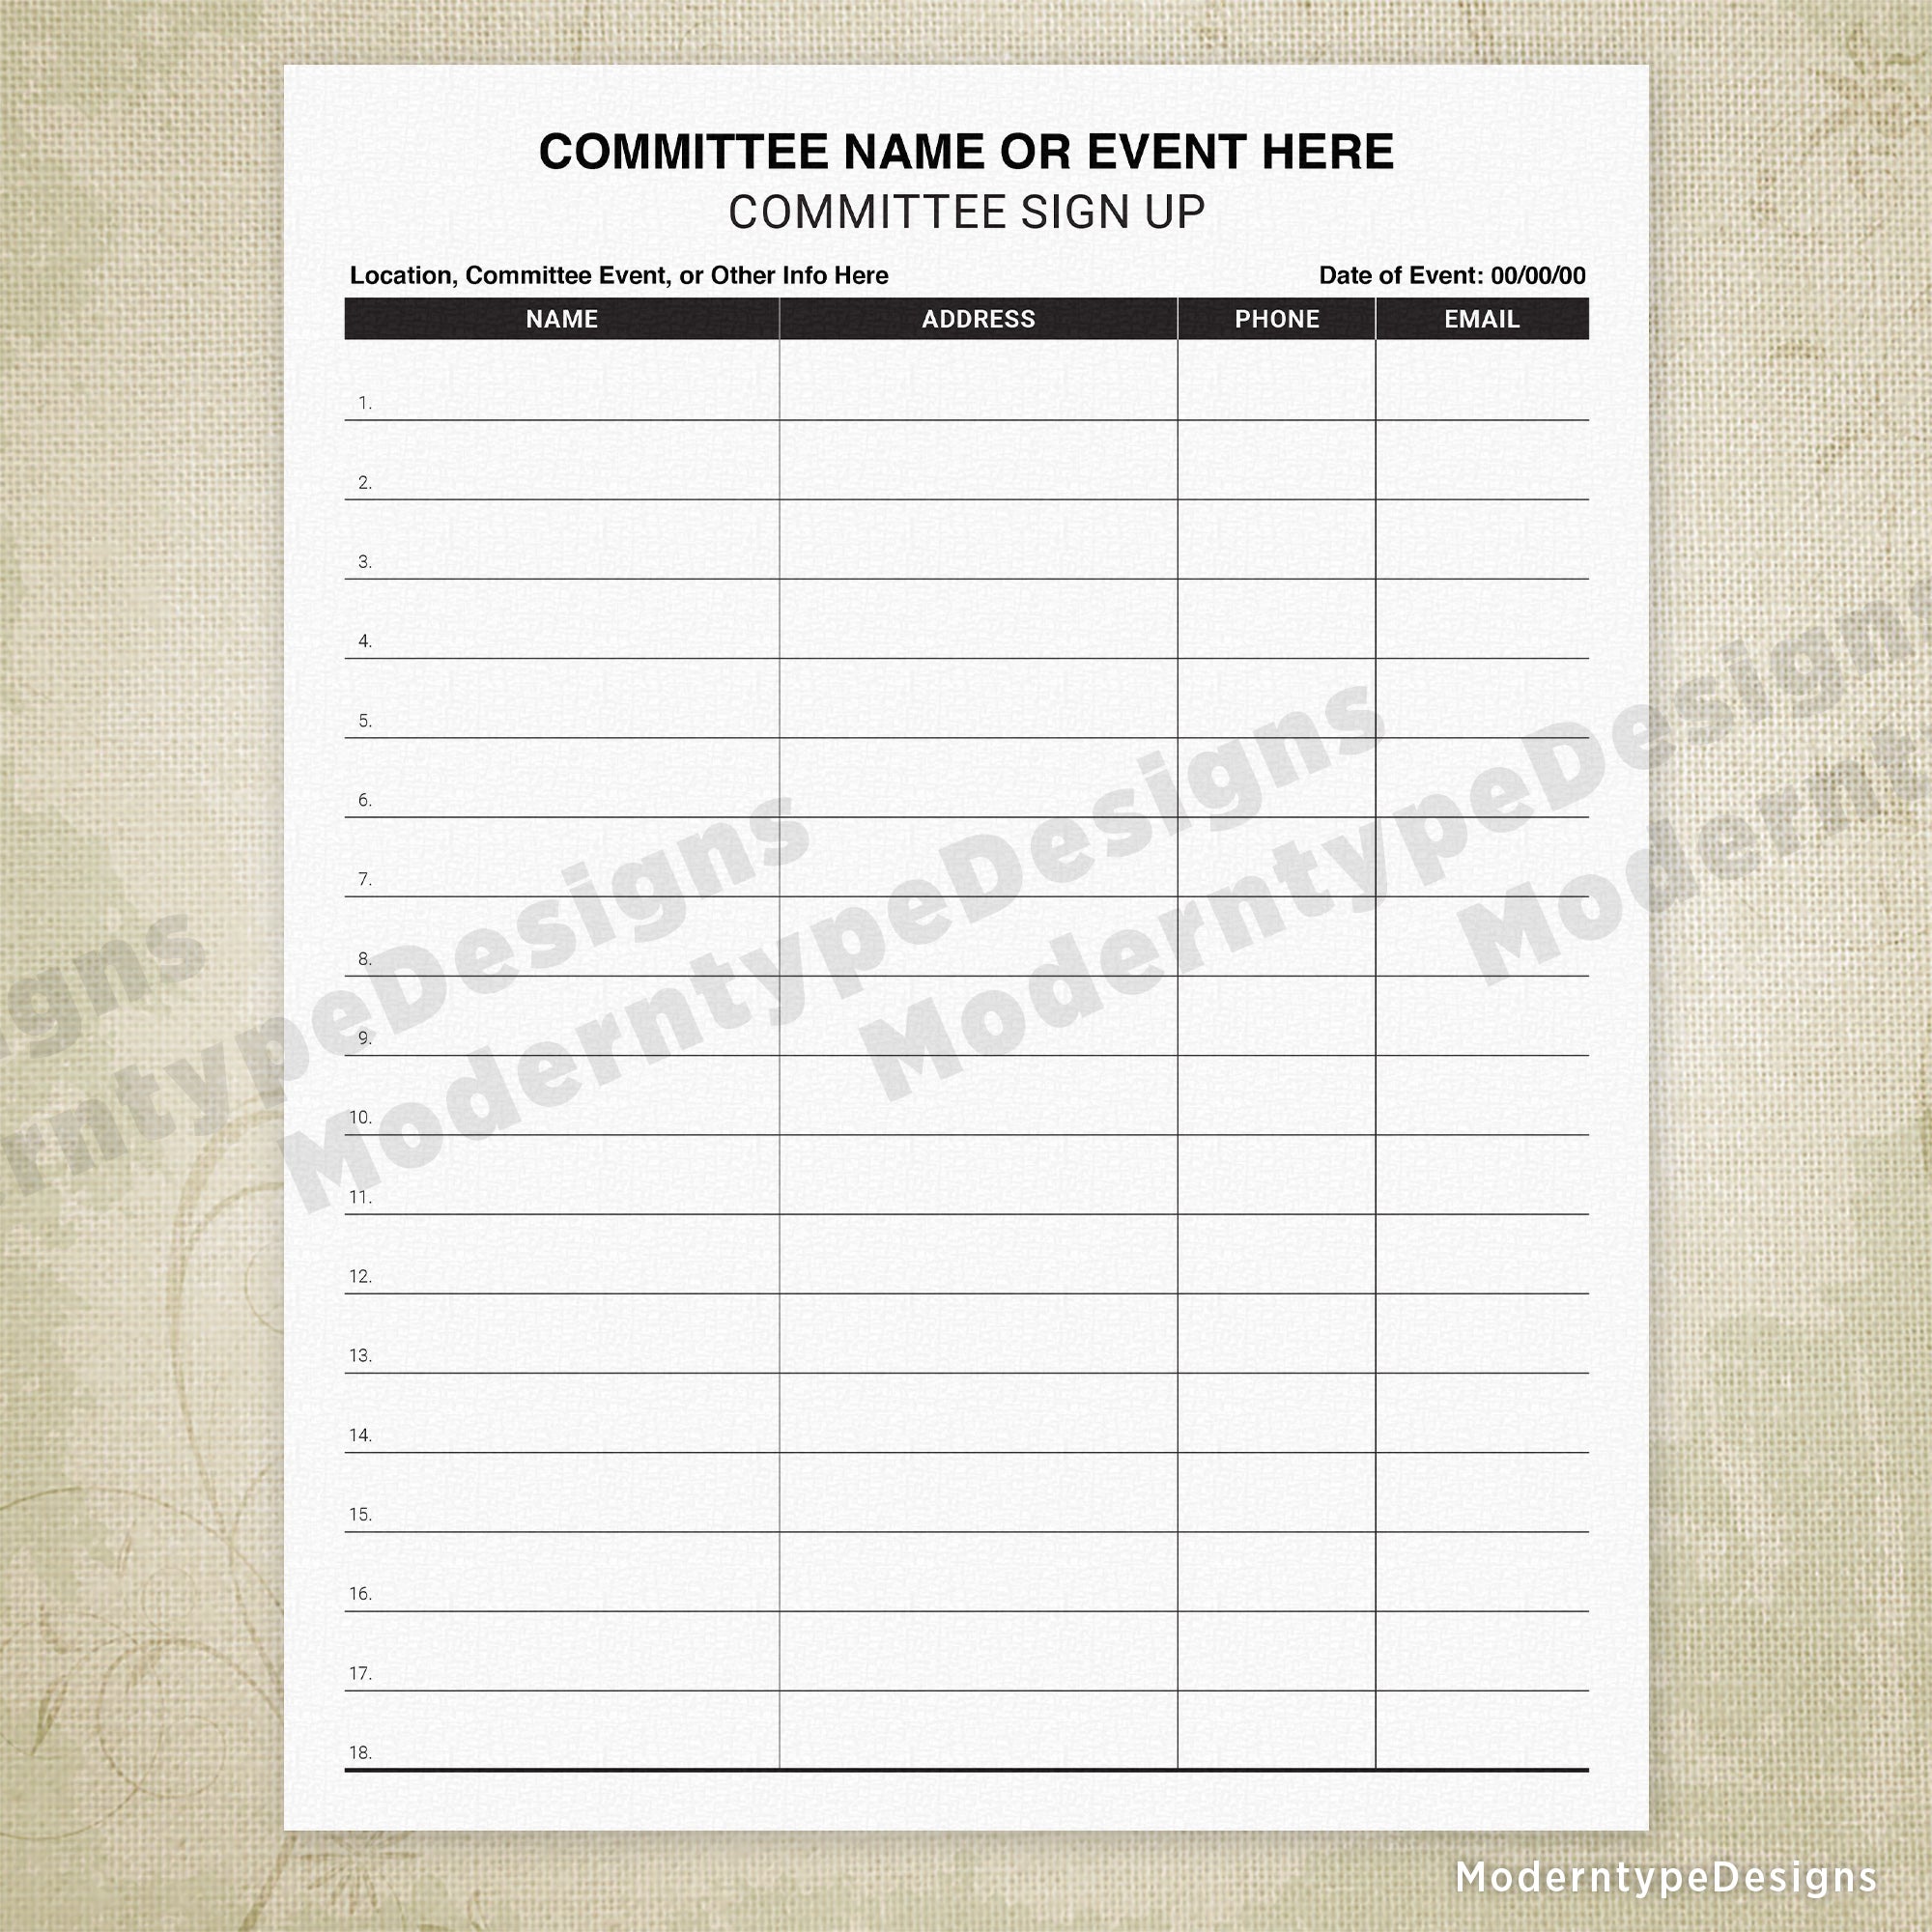 Committee Sign Up Printable Form, Personalized